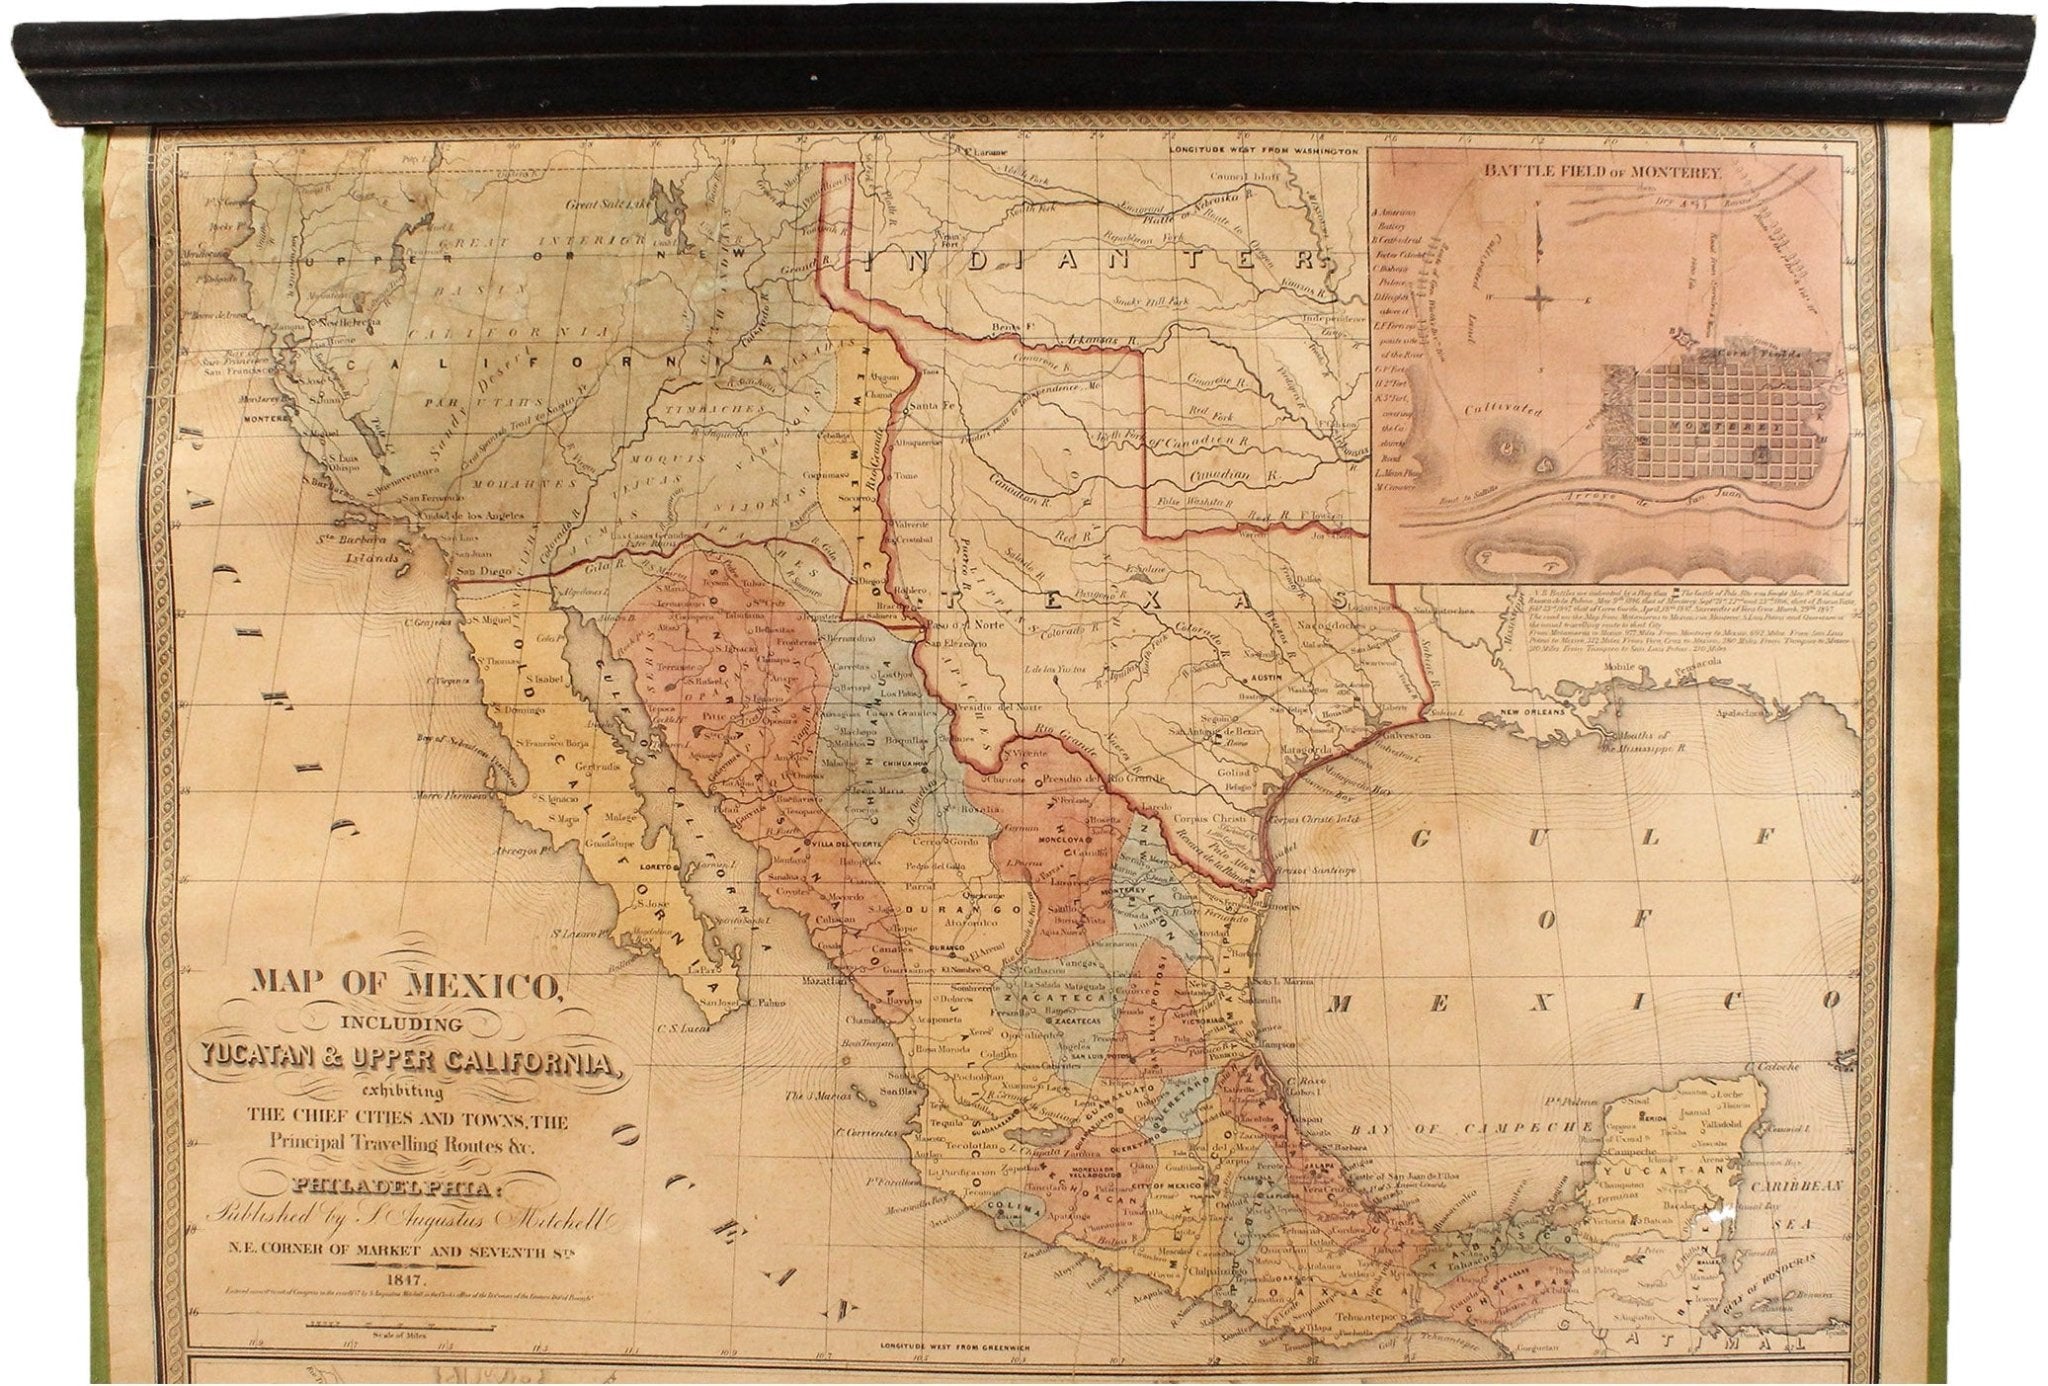 1847 "Map of Mexico, Including Yucatan & Upper California..." by Samuel Augustus Mitchell - The Great Republic